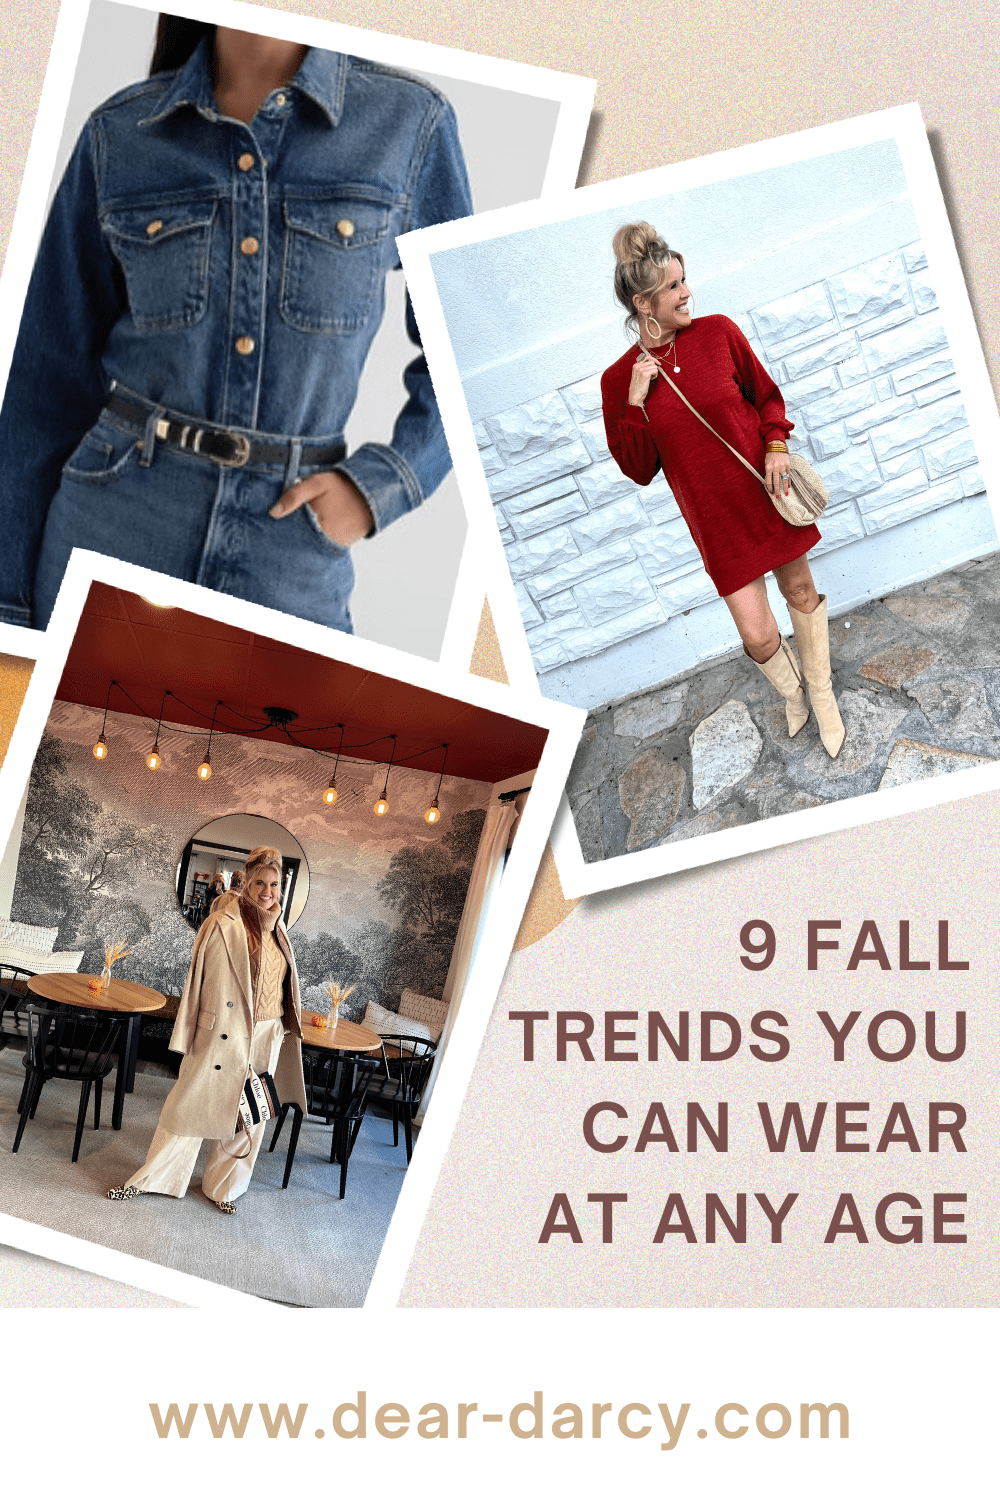 9 Fall trends you can wear at any age